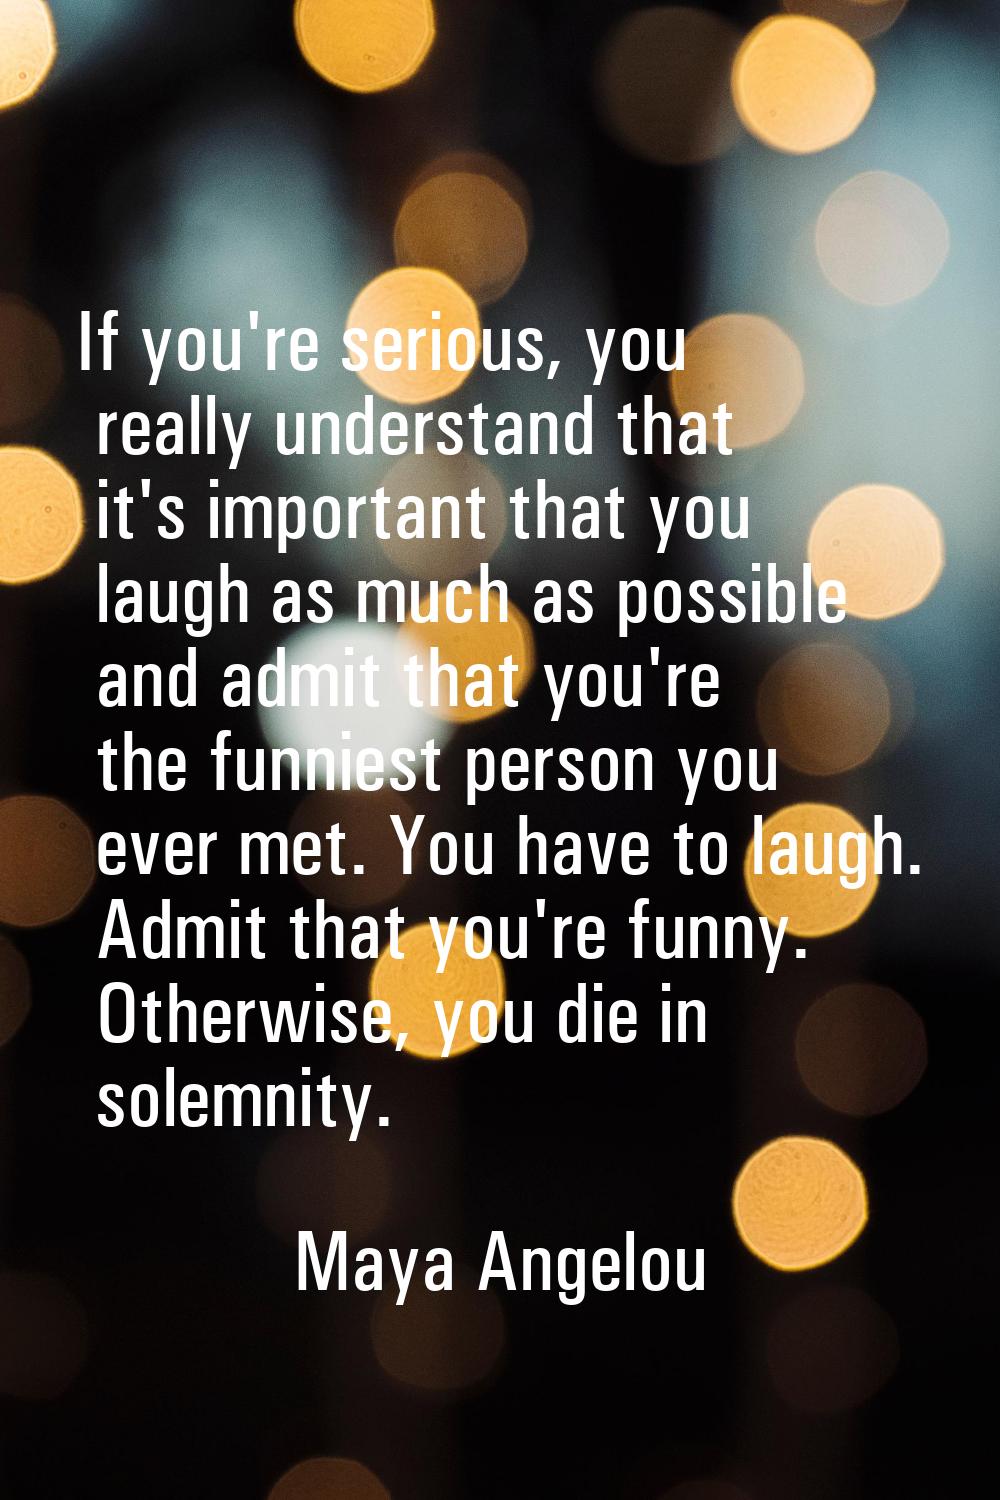 If you're serious, you really understand that it's important that you laugh as much as possible and